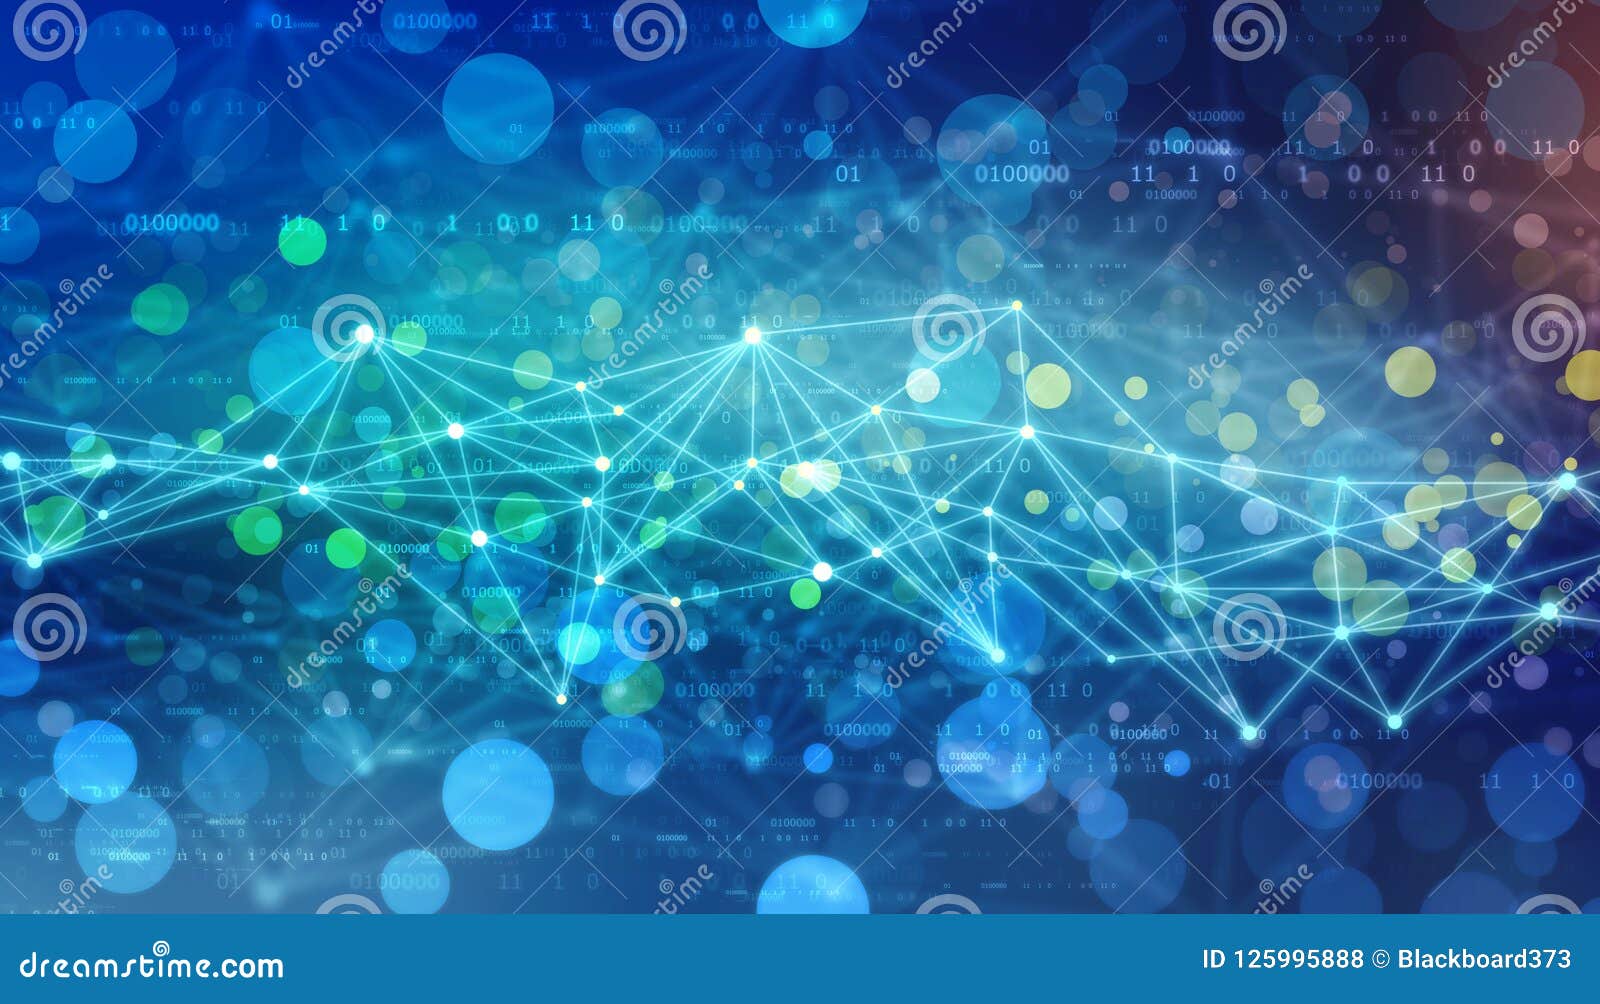 triangular tech background with connections, internet connection technology background